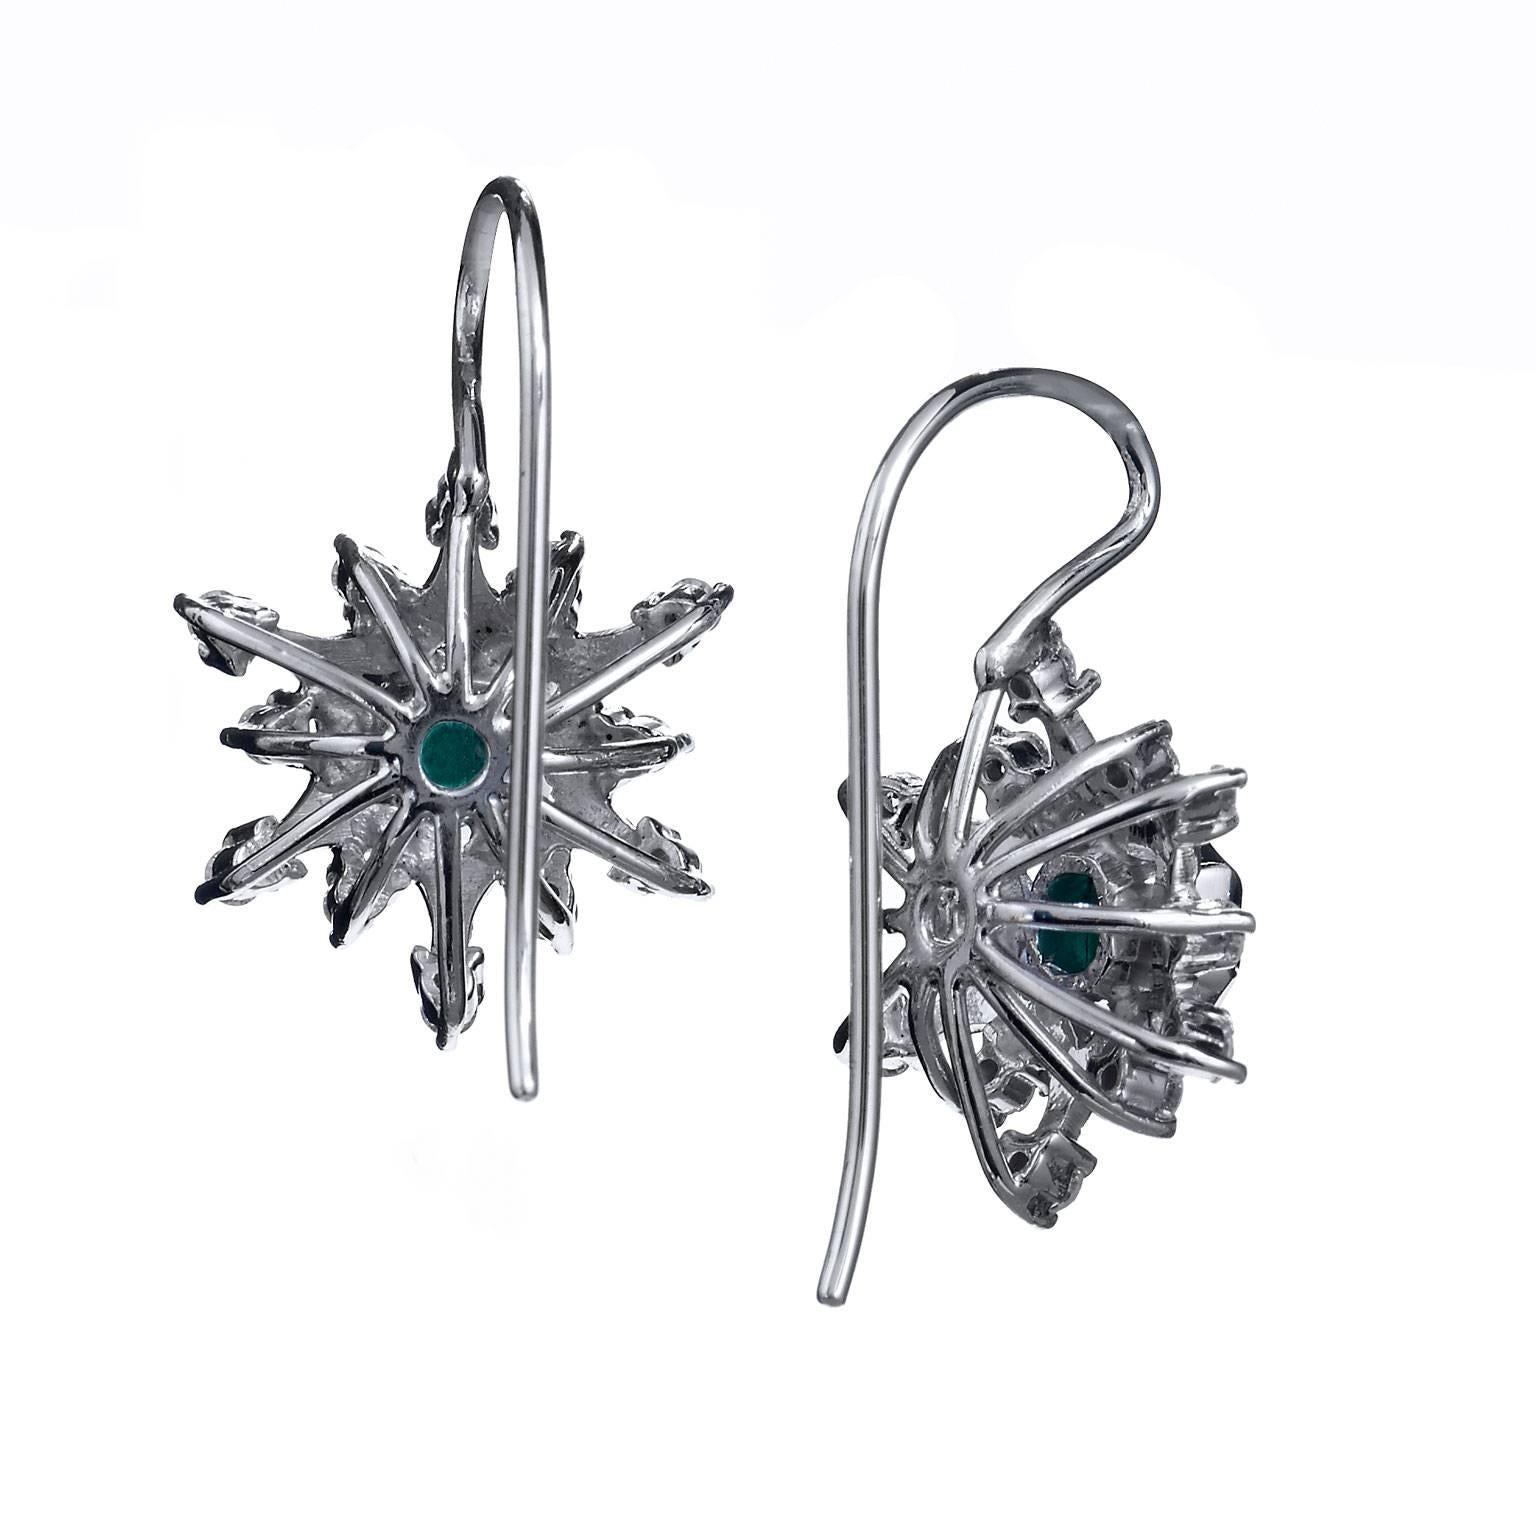 These beautiful hand crafted 18kt. white gold earrings have as their center pieces estimated 0.50 cttw Asscher Cut Colombian Emeralds and adorned with 24pcs estimated 0.25 ct G/H SI1/SI2 Diamond Pave. Let these fashionable drop earrings show her how